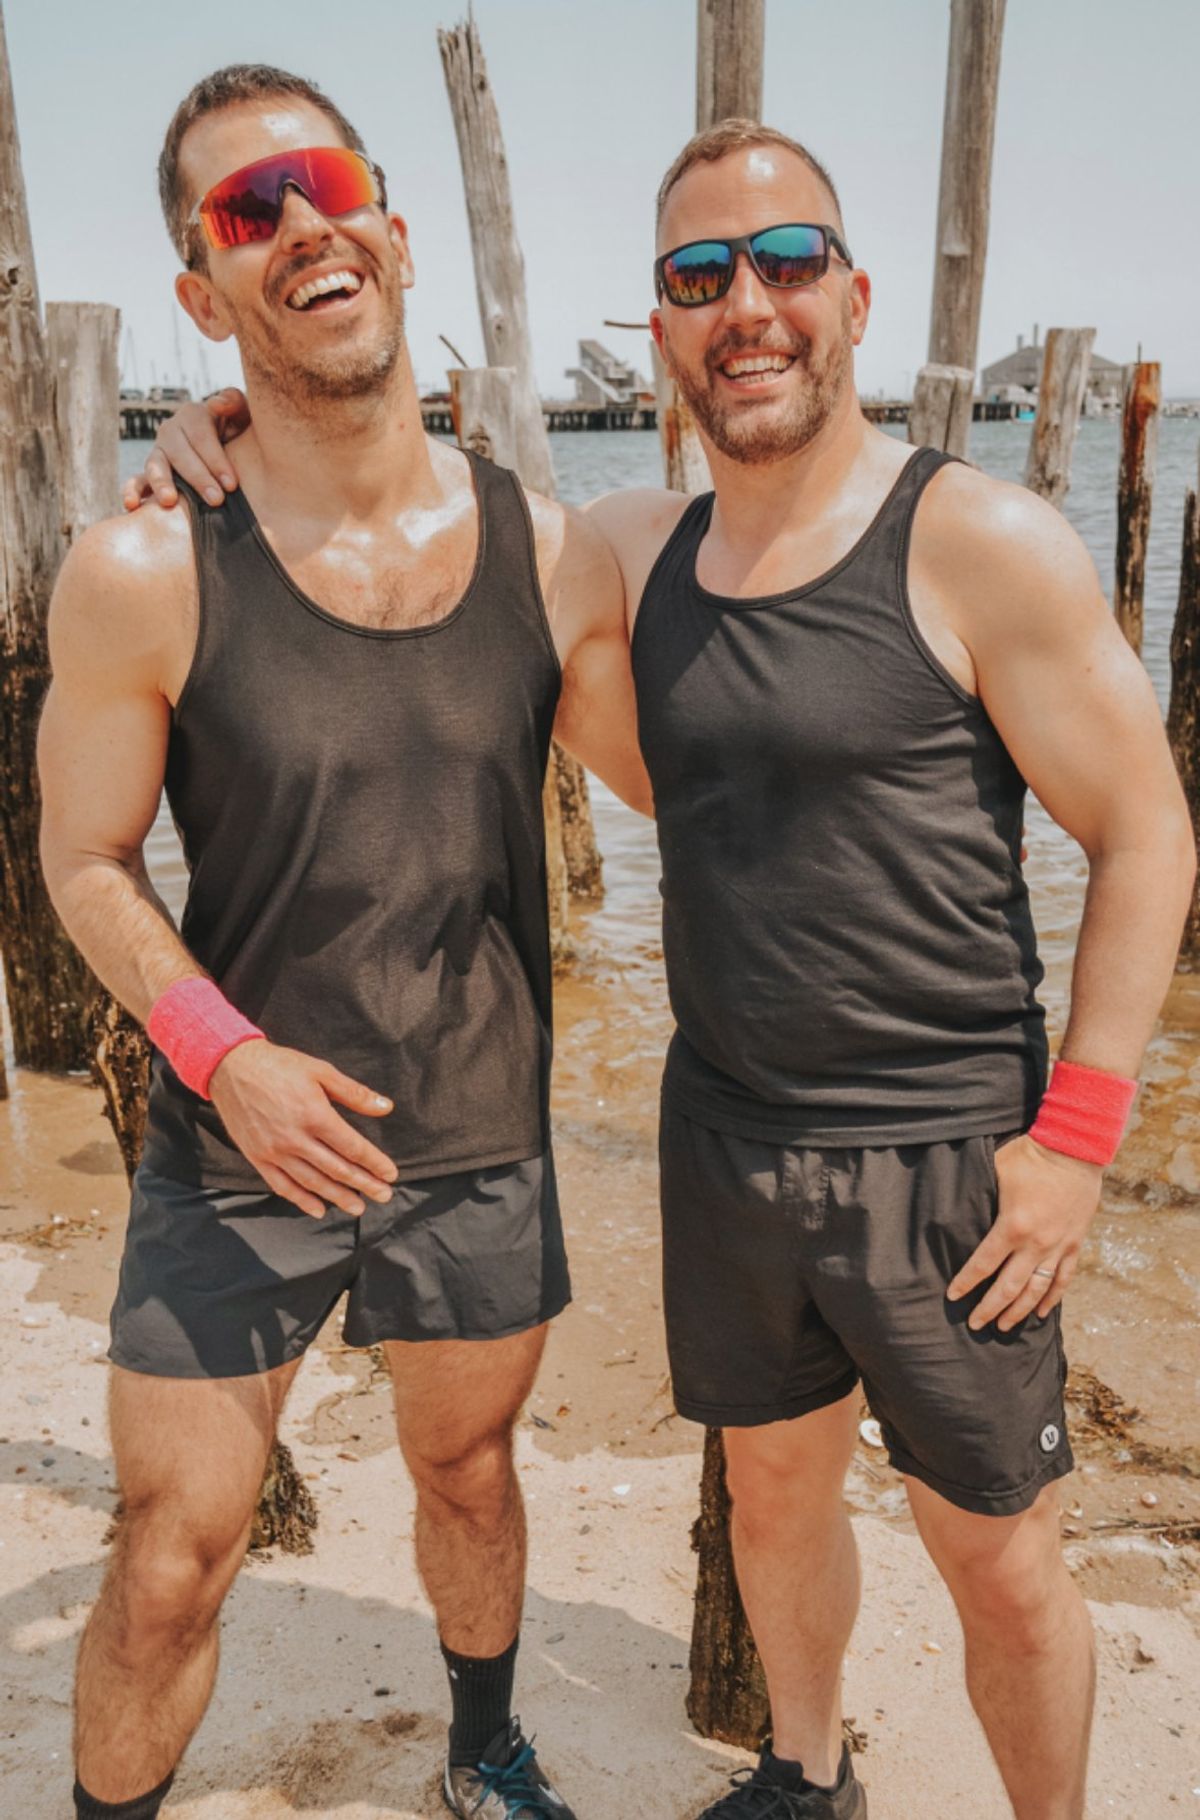 Former Google Executive and Broadway Dancer, Gay Fitness Experts Launch Helltown.Fit in Provincetown